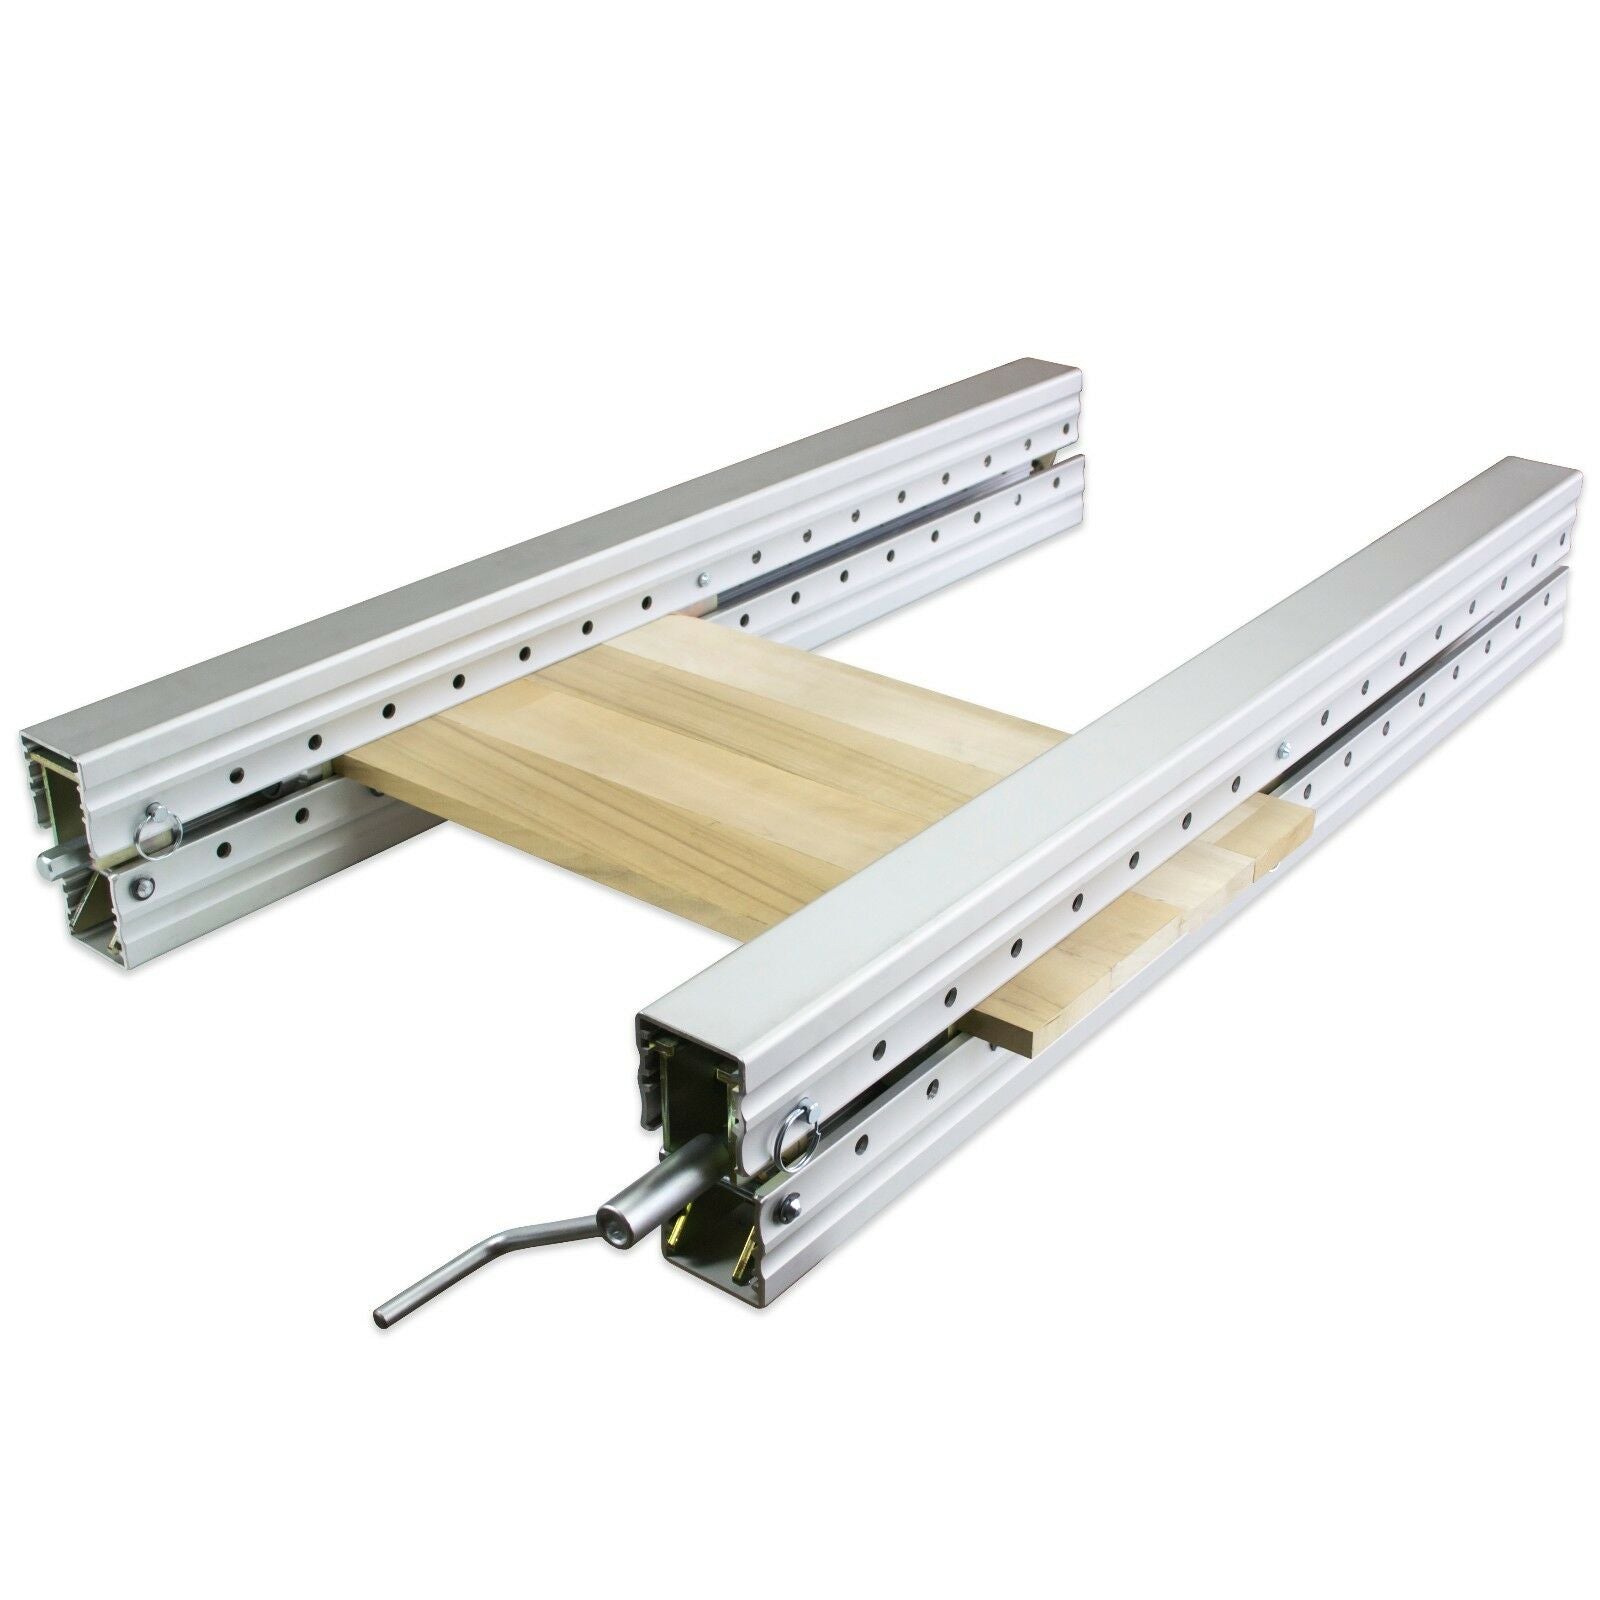 Frontline Wood Clamp System - Flatten & Clamp in One Action (1220mm/48inch)